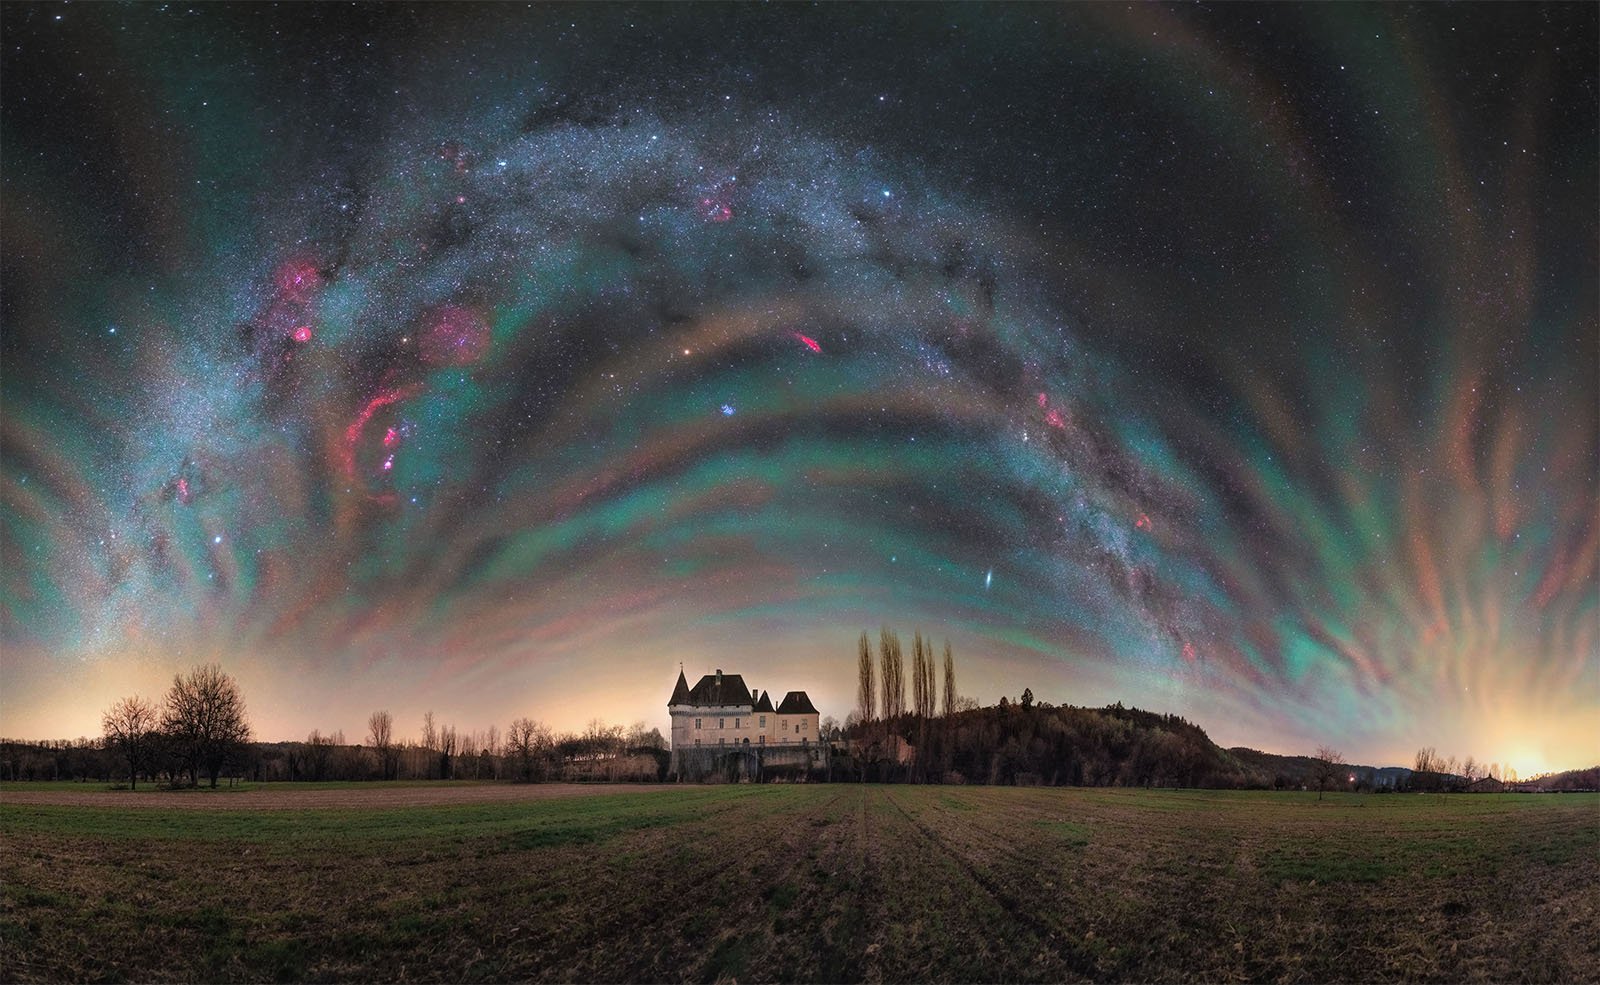 A panoramic night sky showcases stunning auroras and a colorful Milky Way arching over a landscape with an old mansion. The field in the foreground and distant trees create a serene rural setting under the celestial display.